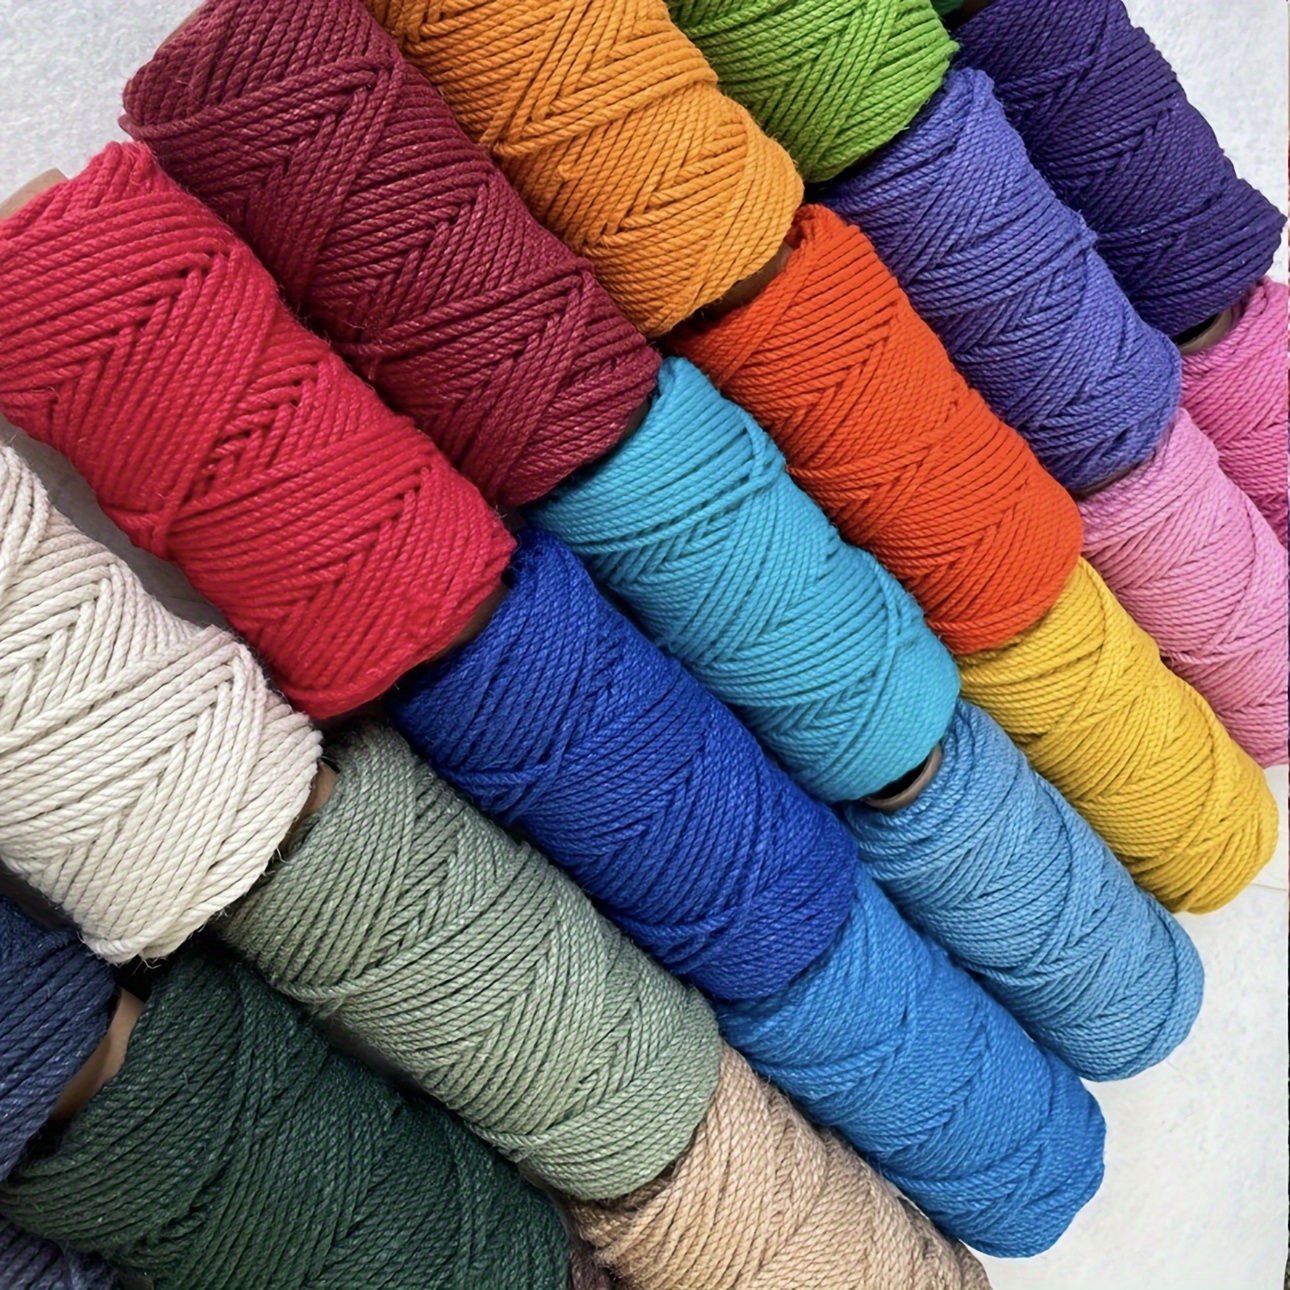 3mm*3937.01inch Macrame Cord -Soft Macrame Rope Perfect For Knots - Macrame  Supplies For Wall Hangers & Boho Decorations - Cotton Rope - Macrame Strin